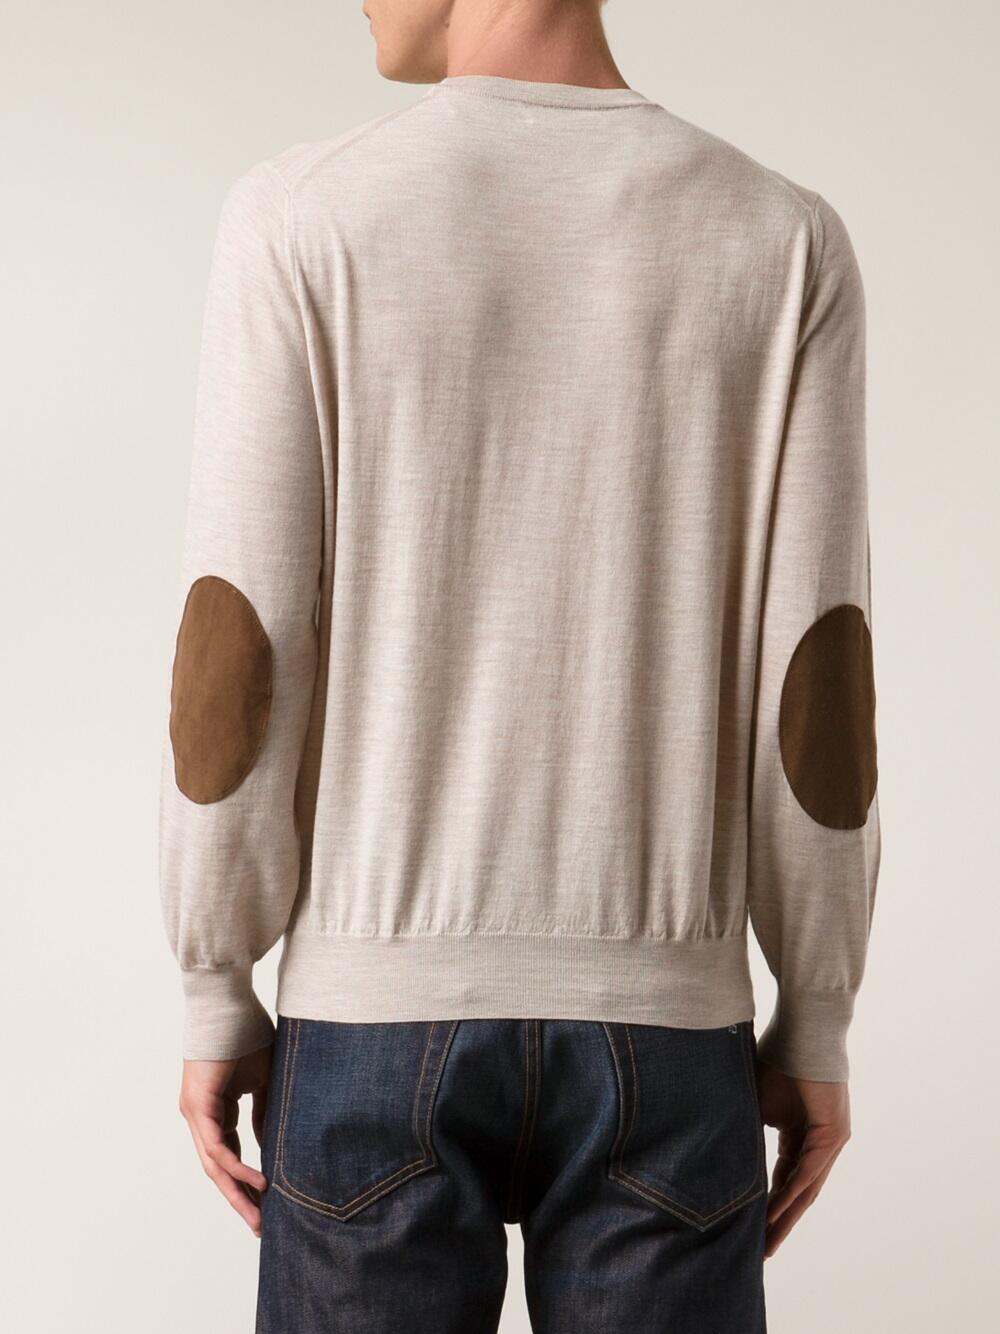 Oatmeal Cotton Sweatshirt with Suede Elbow Patches